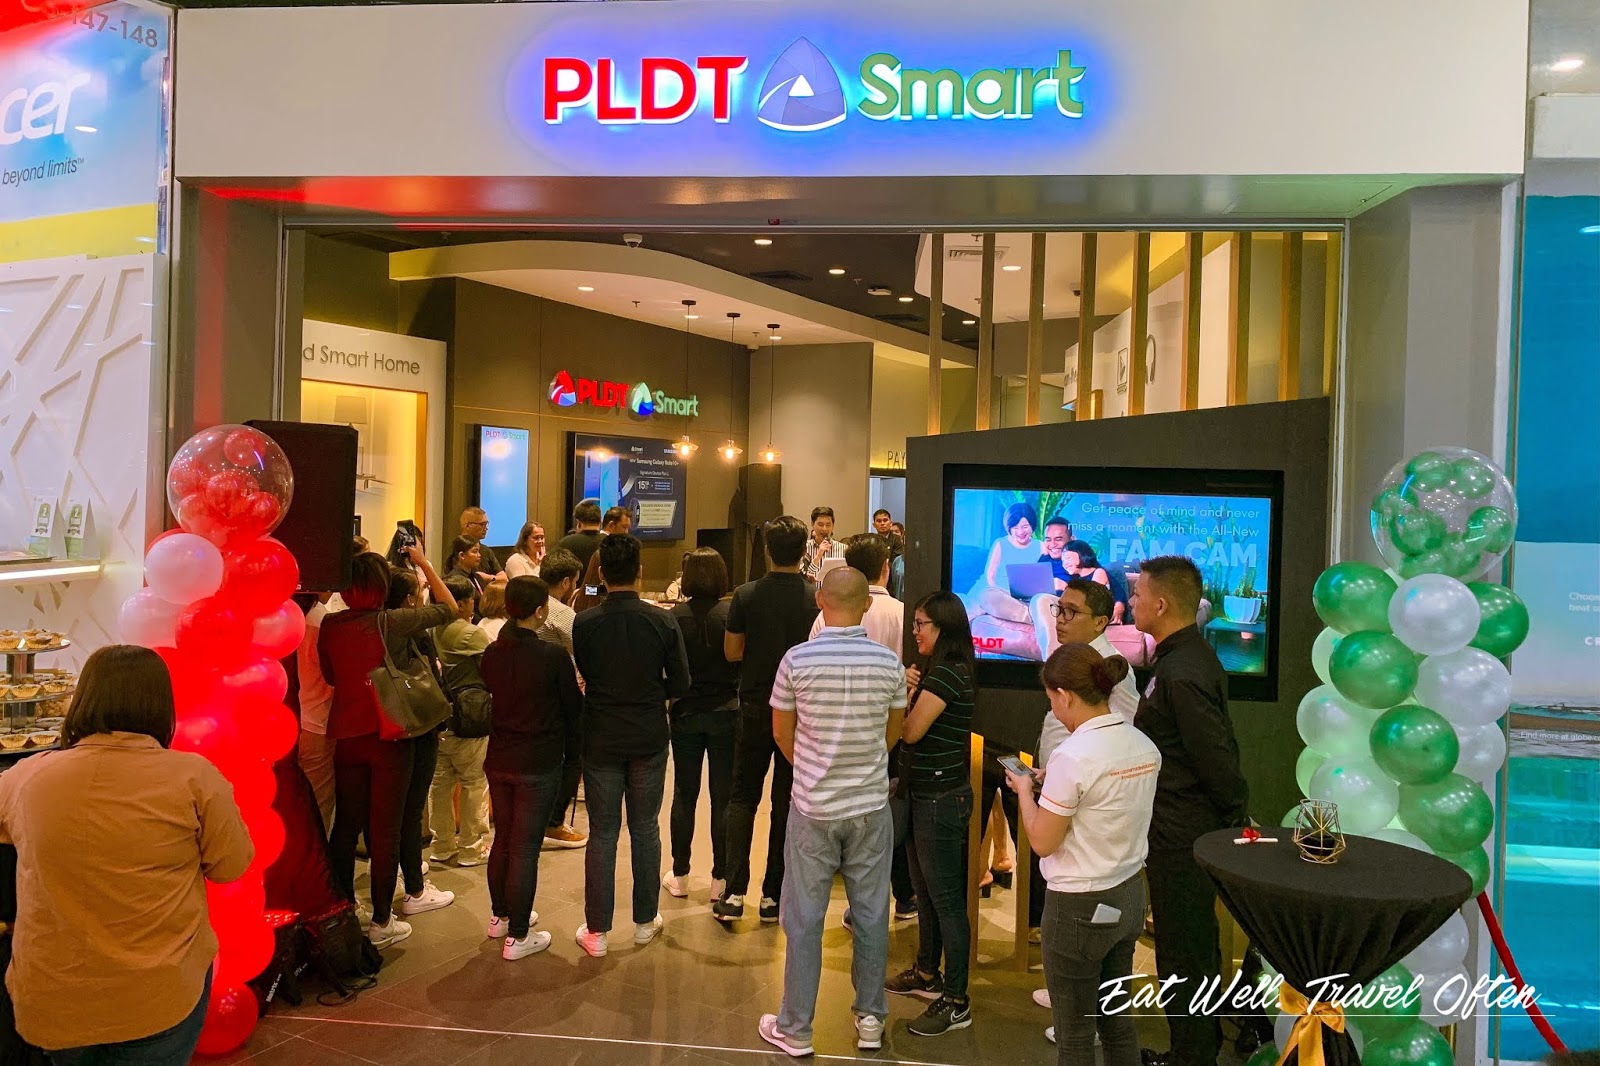 PLDT SMART Convergence Store in Davao